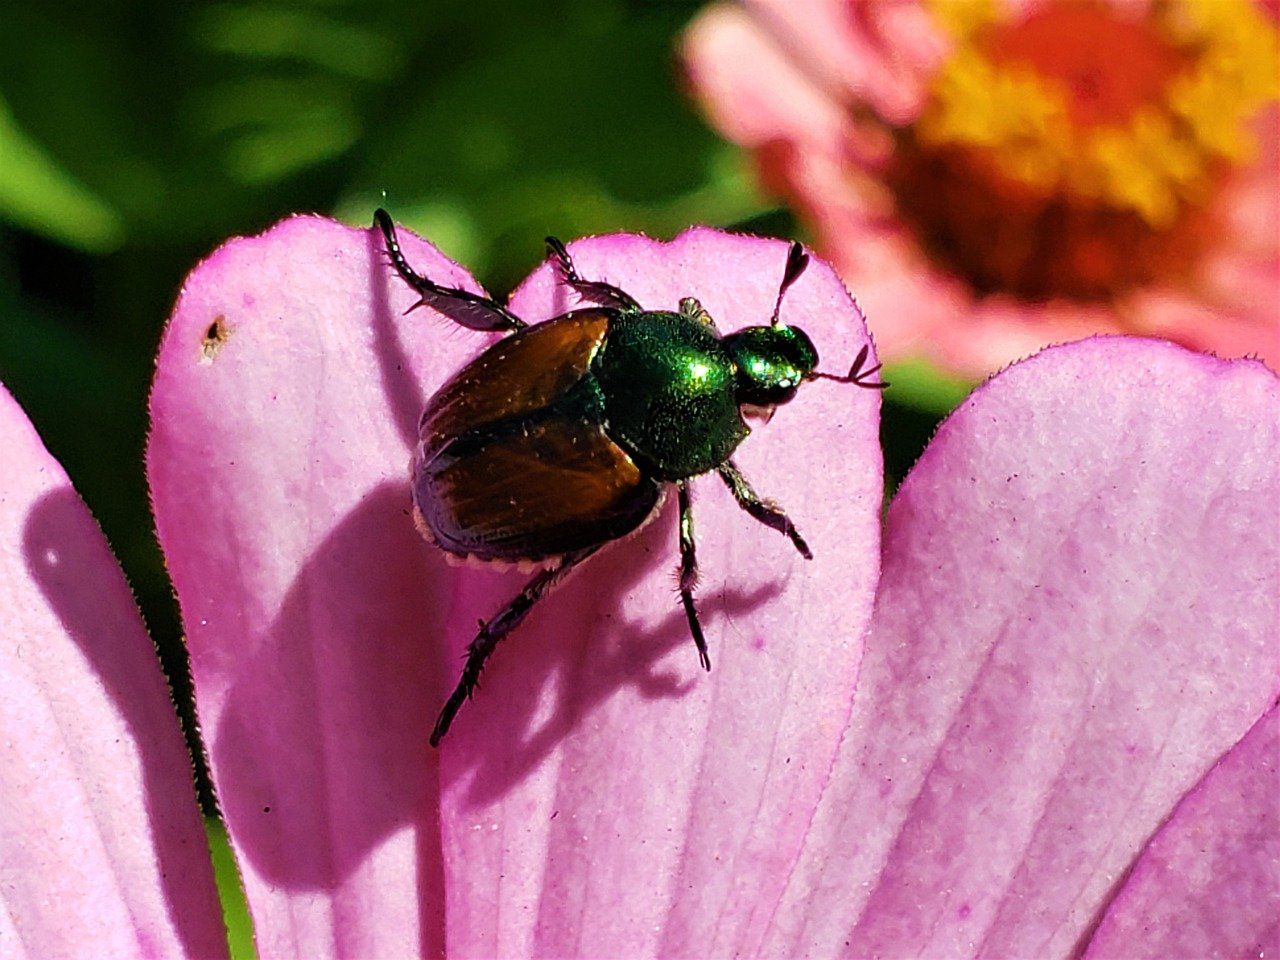 Beetle mania: Beware of unwanted guests from Japan!